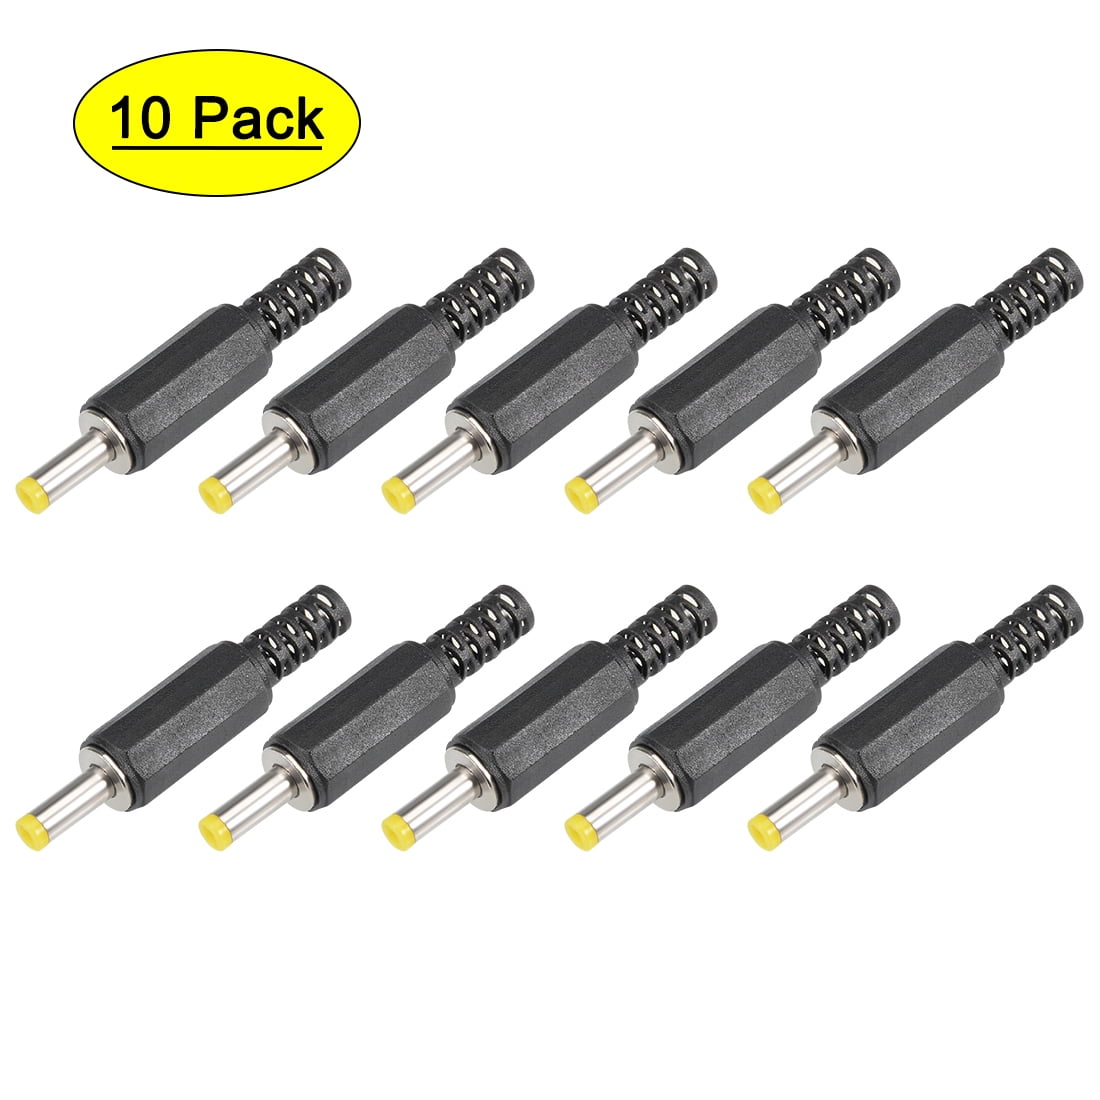 10pcs DC Power Jack 5.5mm x 2.1 Female To 4.0mm x 1.7mm Male Plug Cable adapter 